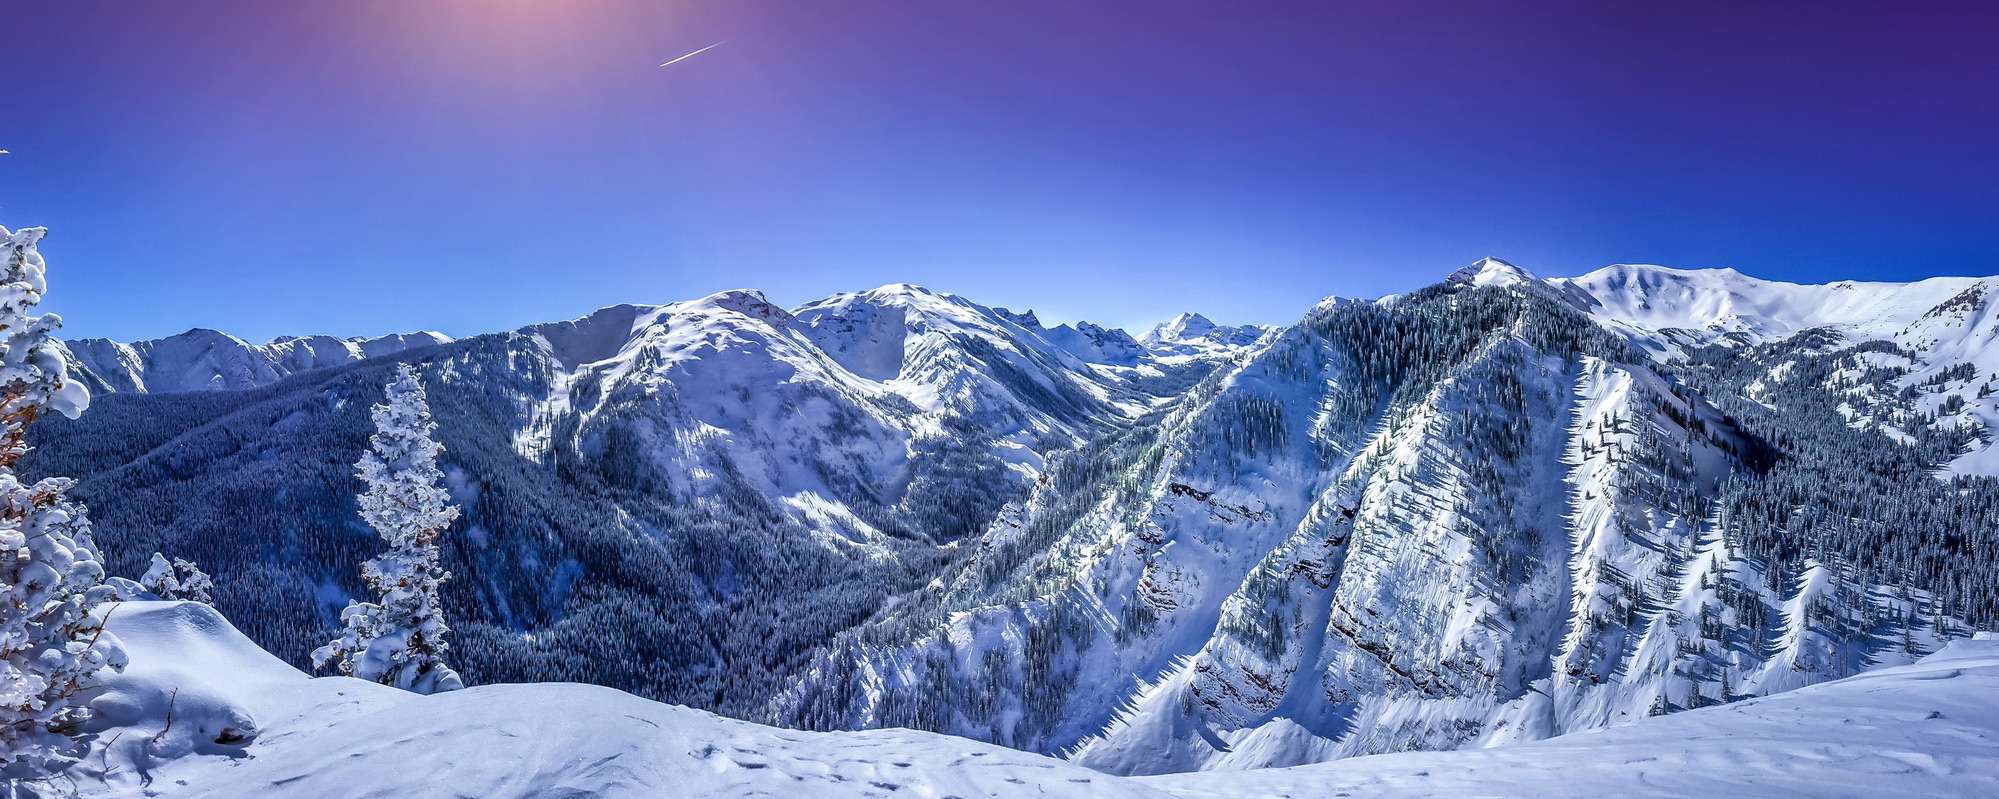 Image of snow covered mountains and a bright blue sky - winter season